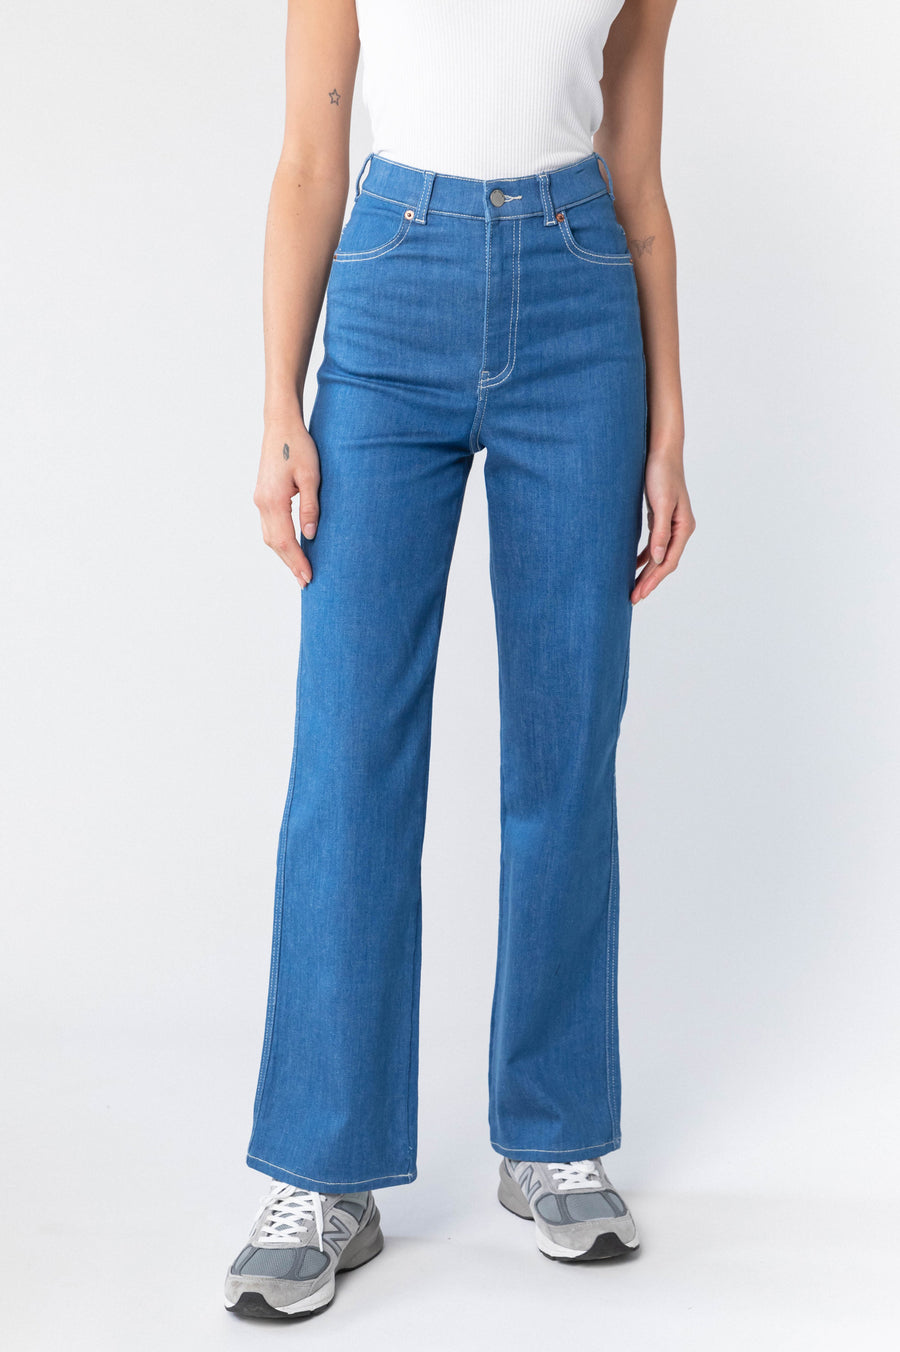 Moxy Straight - Jeans Less Blue Rinse - Final Sale